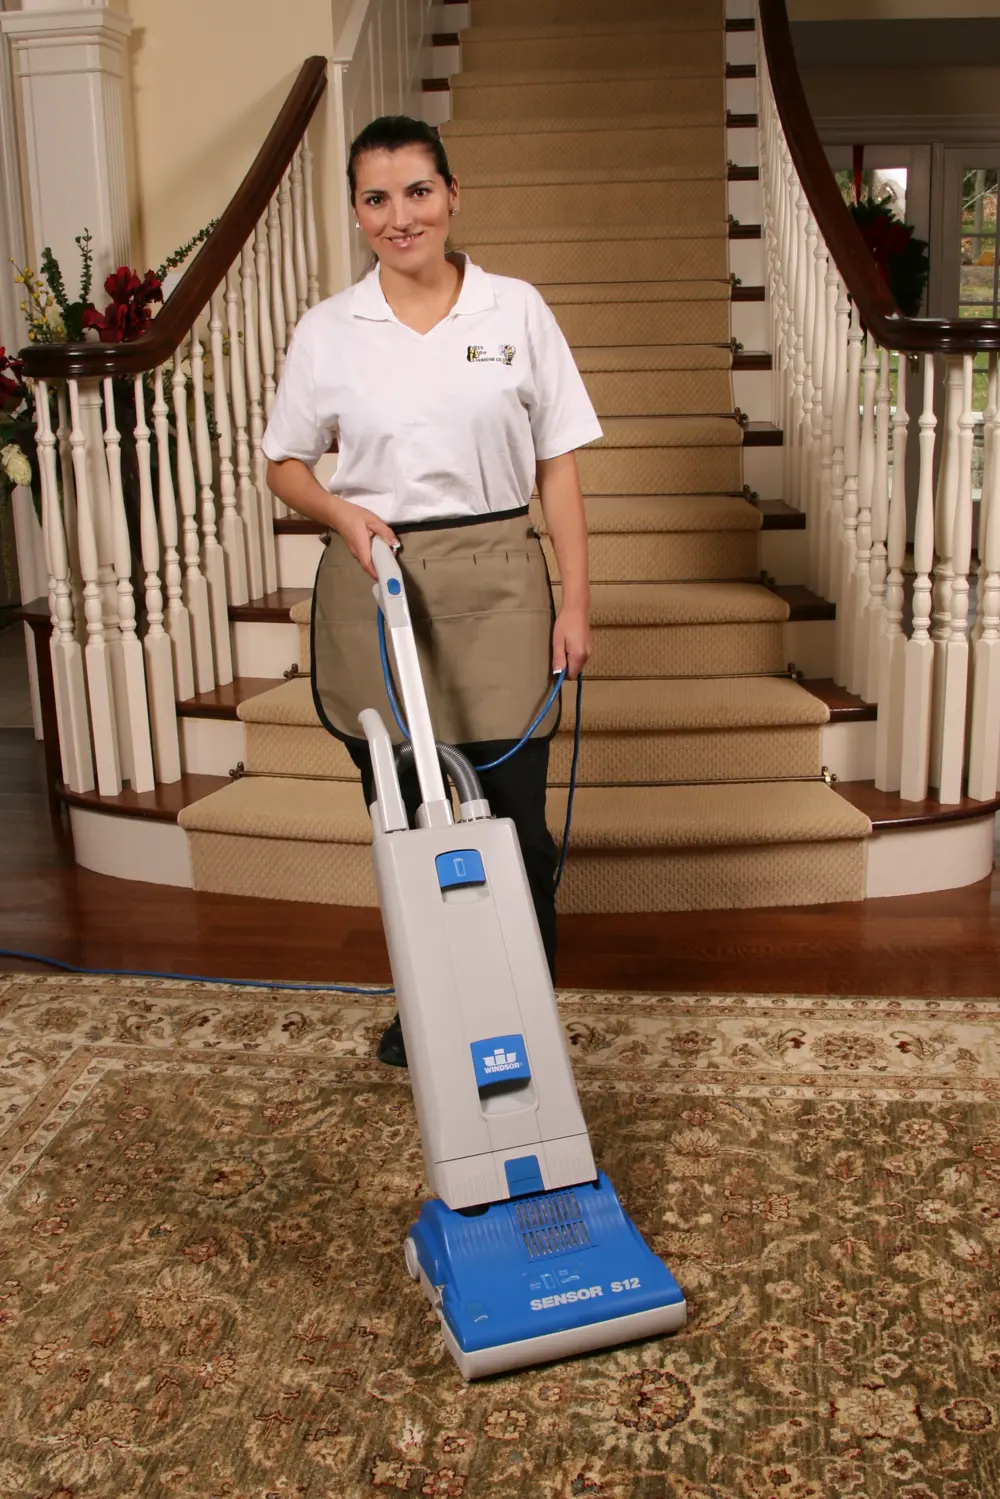 Busy Bee house cleaner and vacuum, house cleaning services, excellent job with paoli house cleaning and commercial cleaning in paoli pa. Our commercial services are similar to our residential cleaning, where we use our own supplies for the actual cleaning. The paoli house cleaning does a great job cleaning for a deep clean or initial cleaning in paoli pa. 